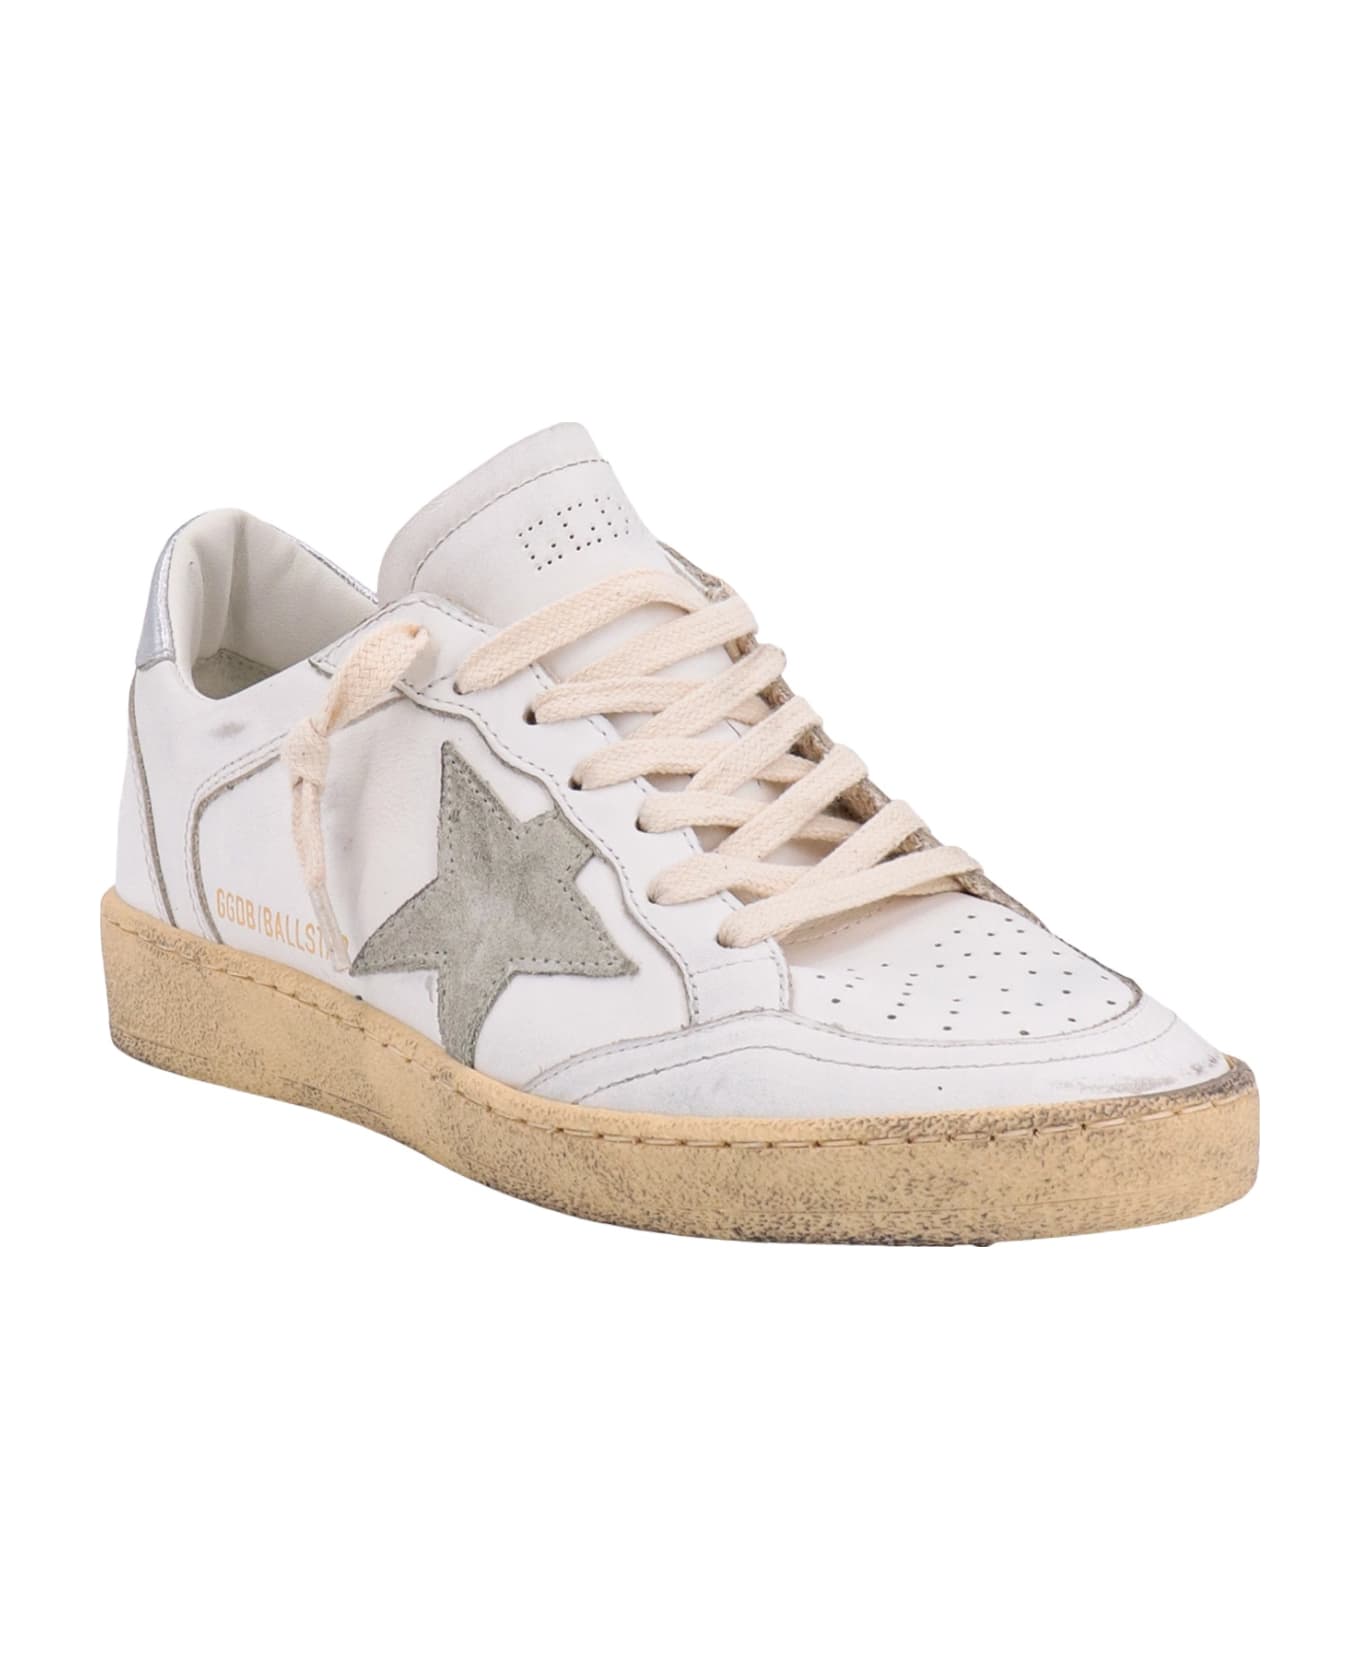 Golden Goose Ball Star Double Quarter Leather Sneakers - White/Ice/Silver スニーカー